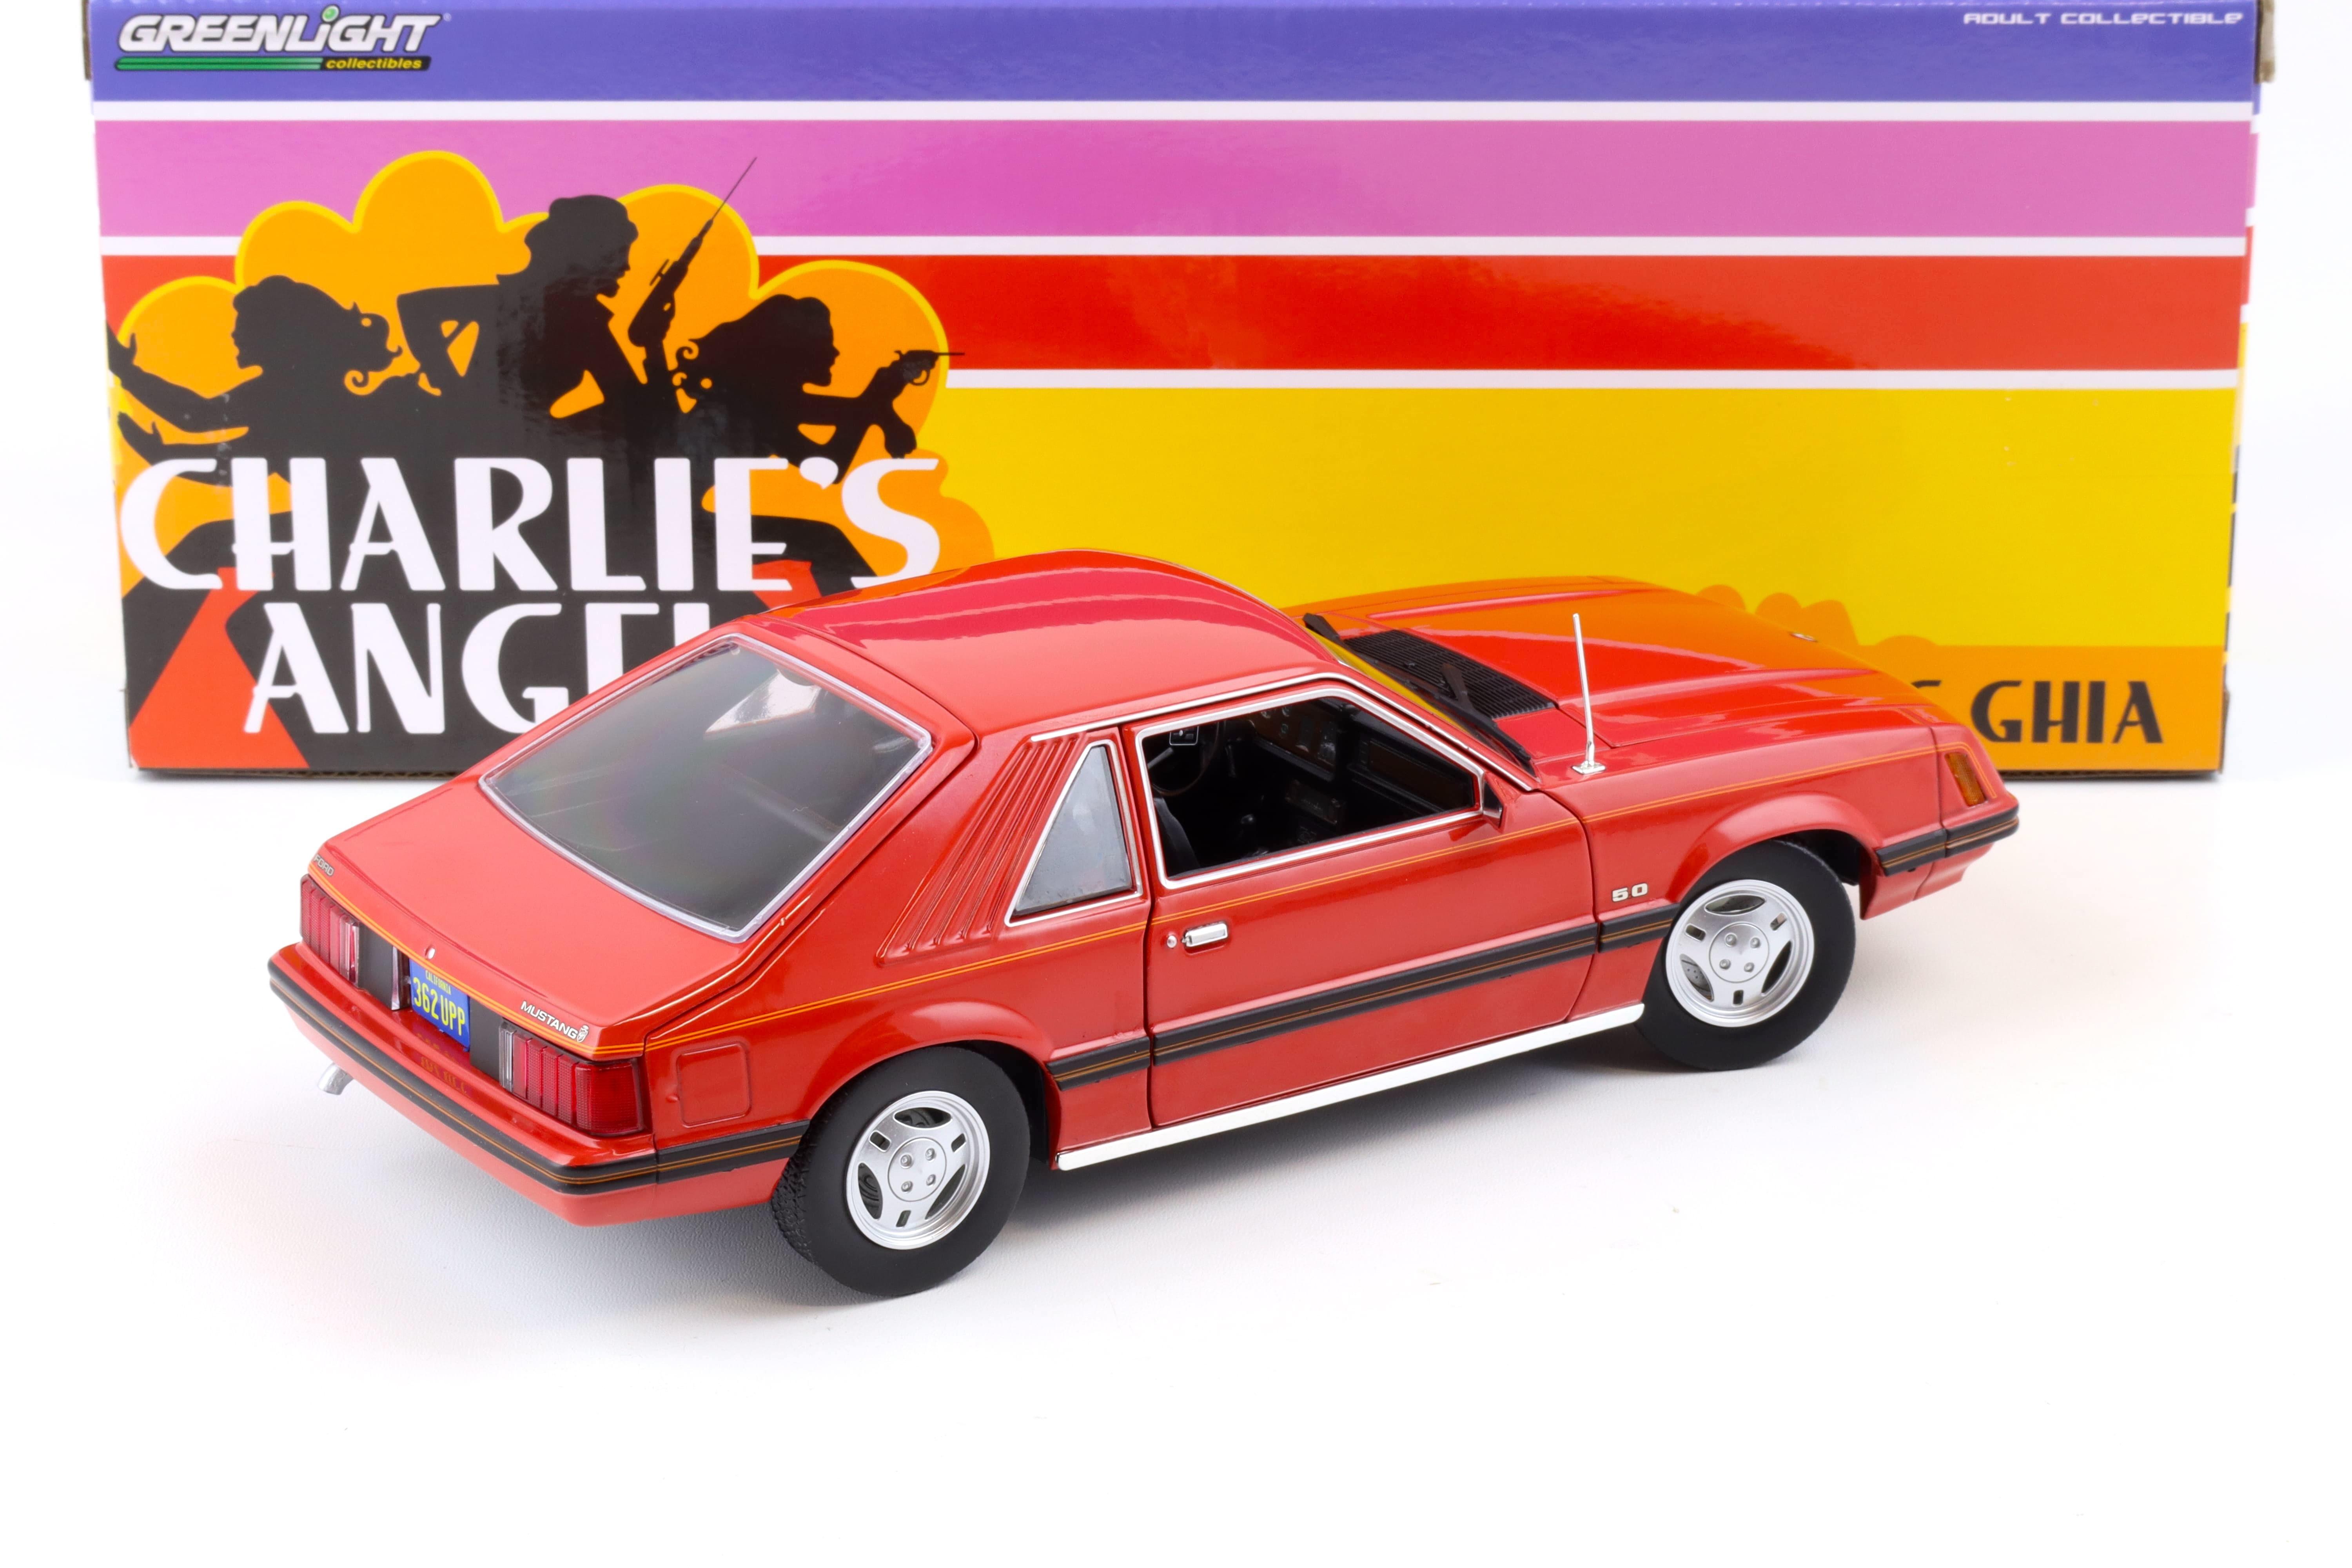 1:18 Greenlight 1979 Ford Mustang Ghia Coupe medium red/ black stripe Charlie's Angels